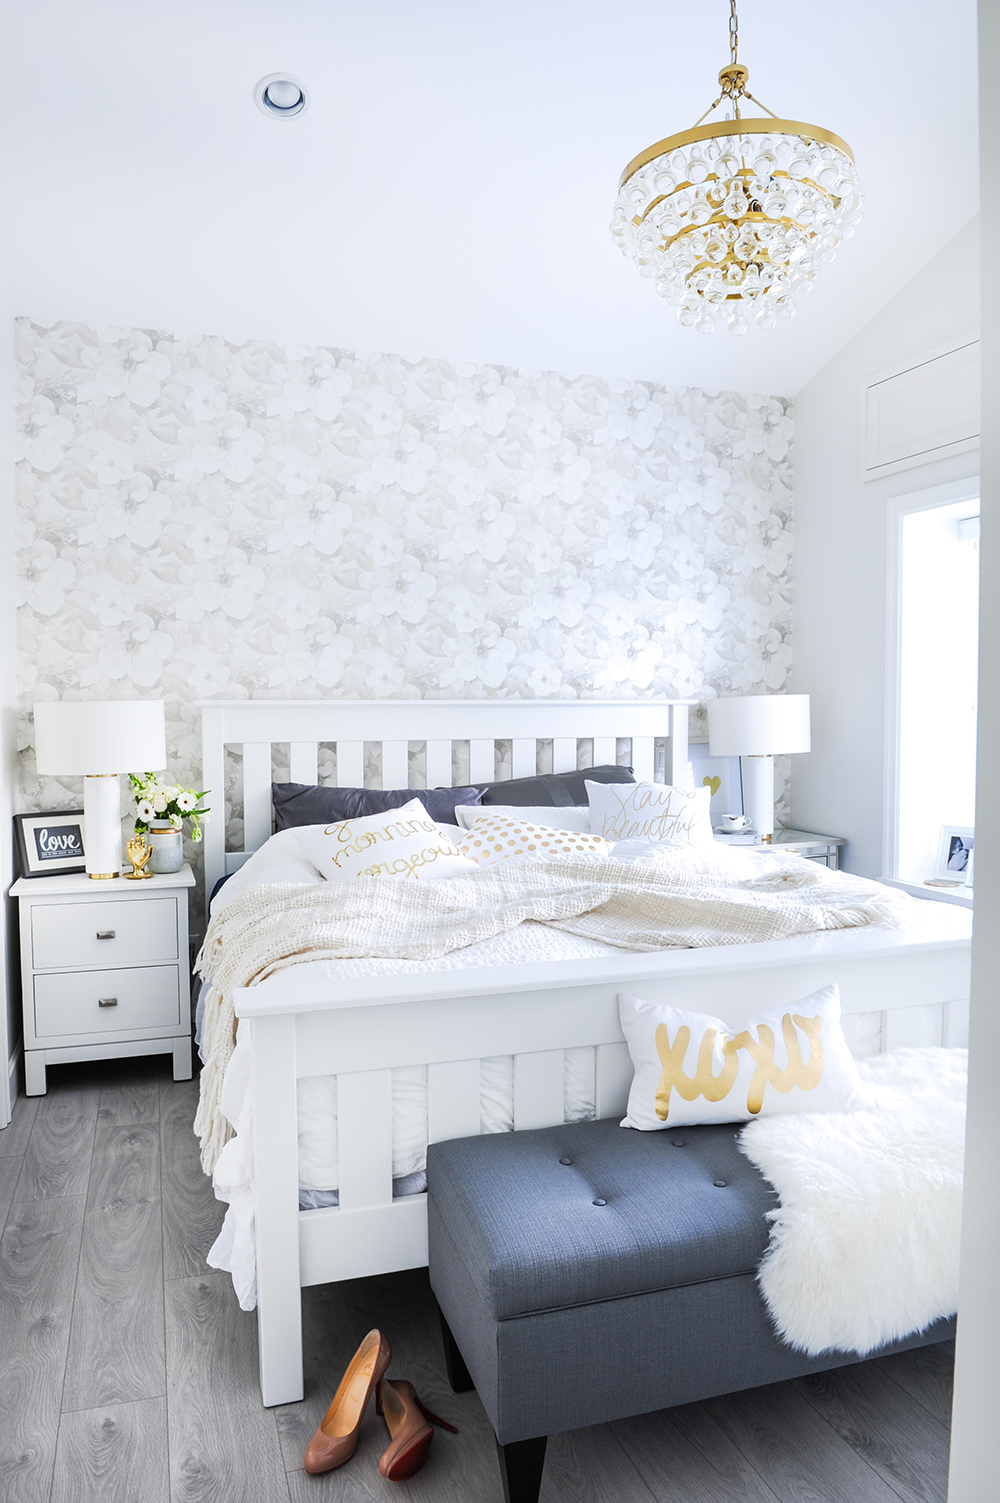 A dreamy light-filled master bedroom with glam touches.